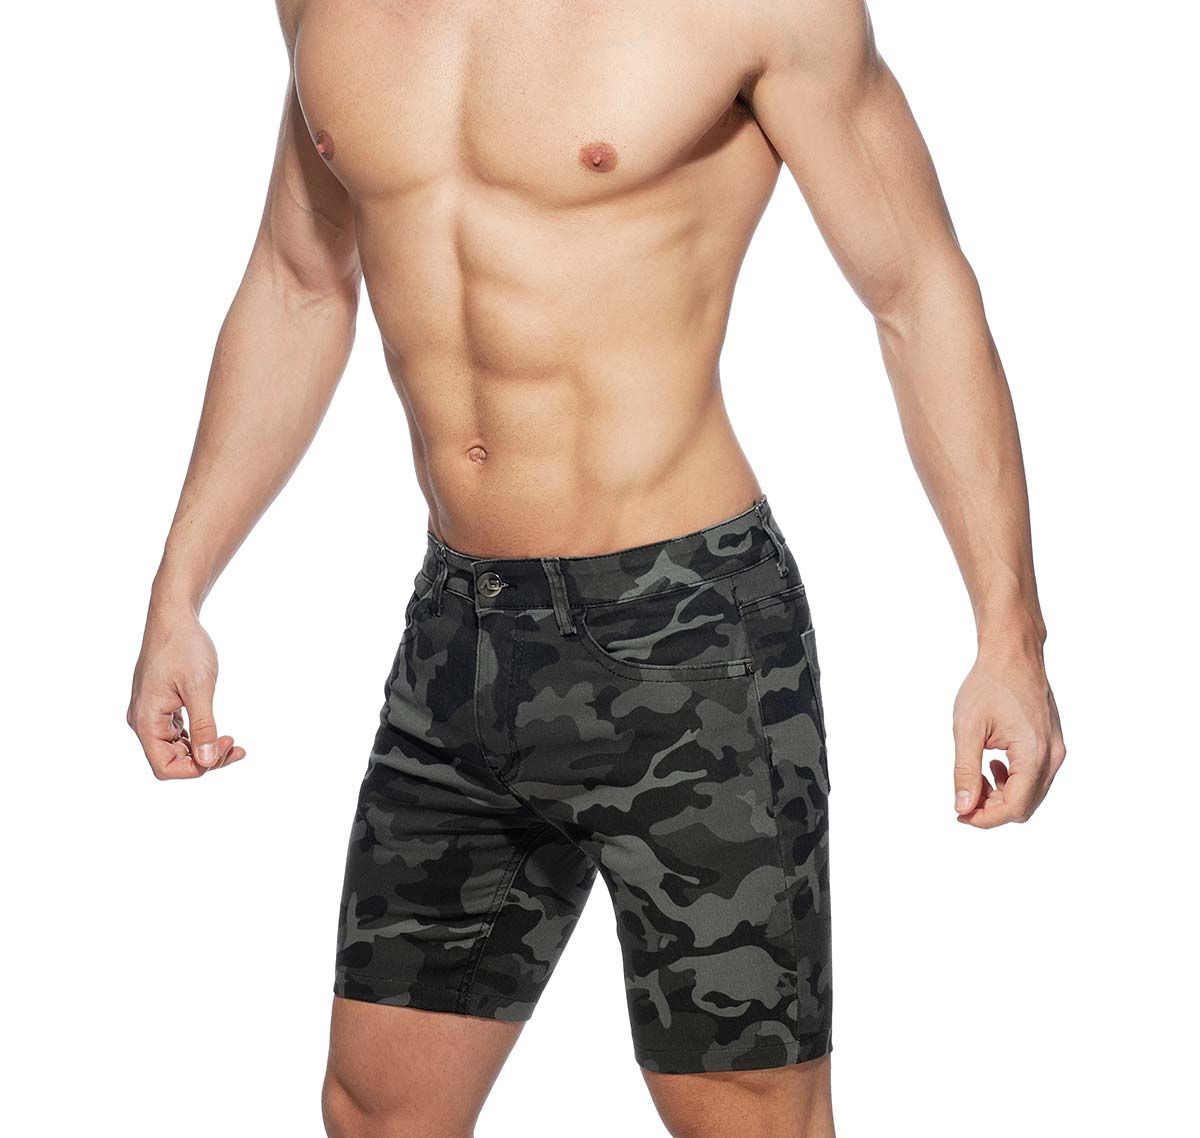 Addicted Jeans-Shorts CAMO BERMUDA JEANS AD913, army-grey